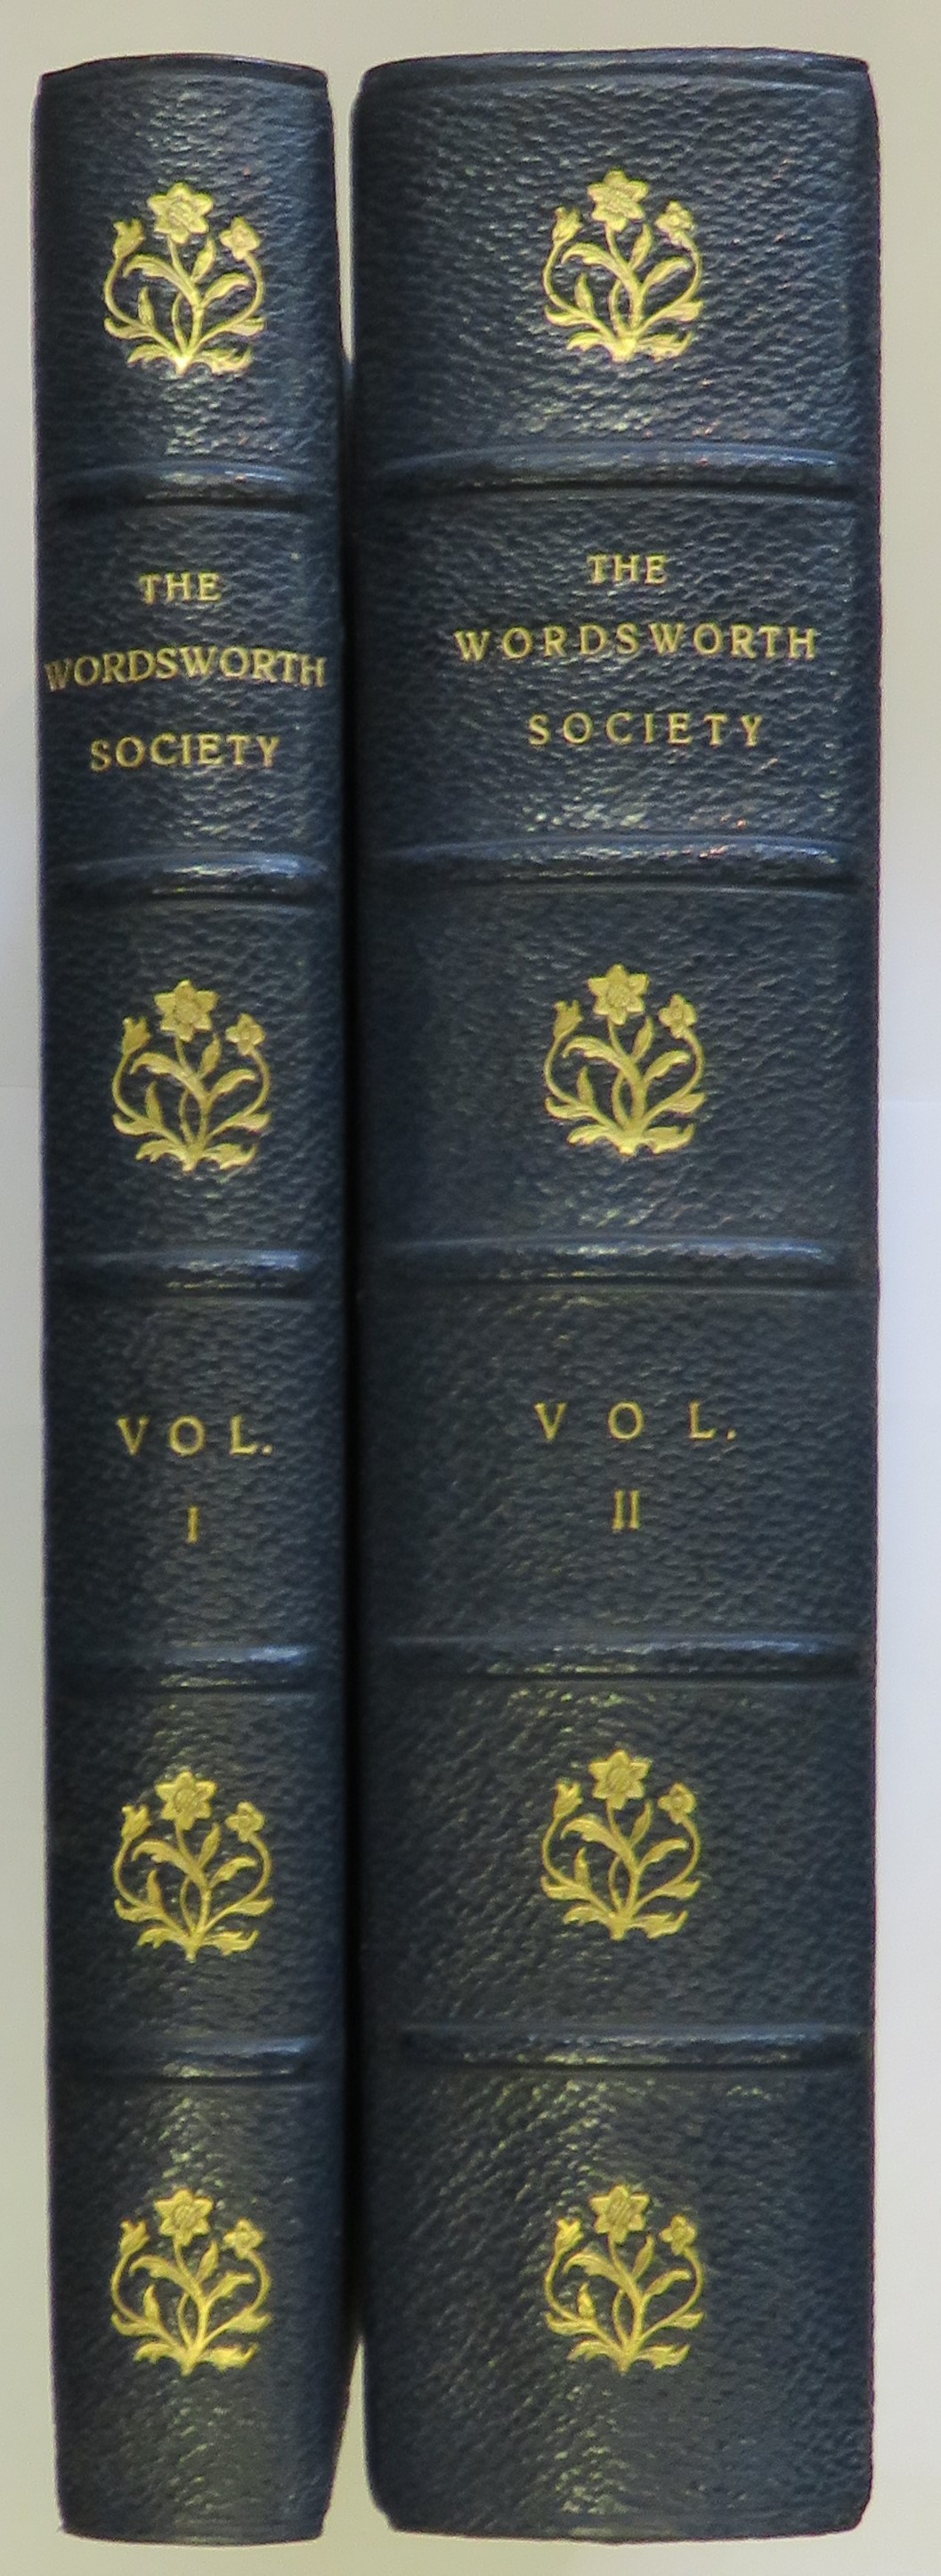 Transactions of The Wordsworth Society: Complete in Two Volumes